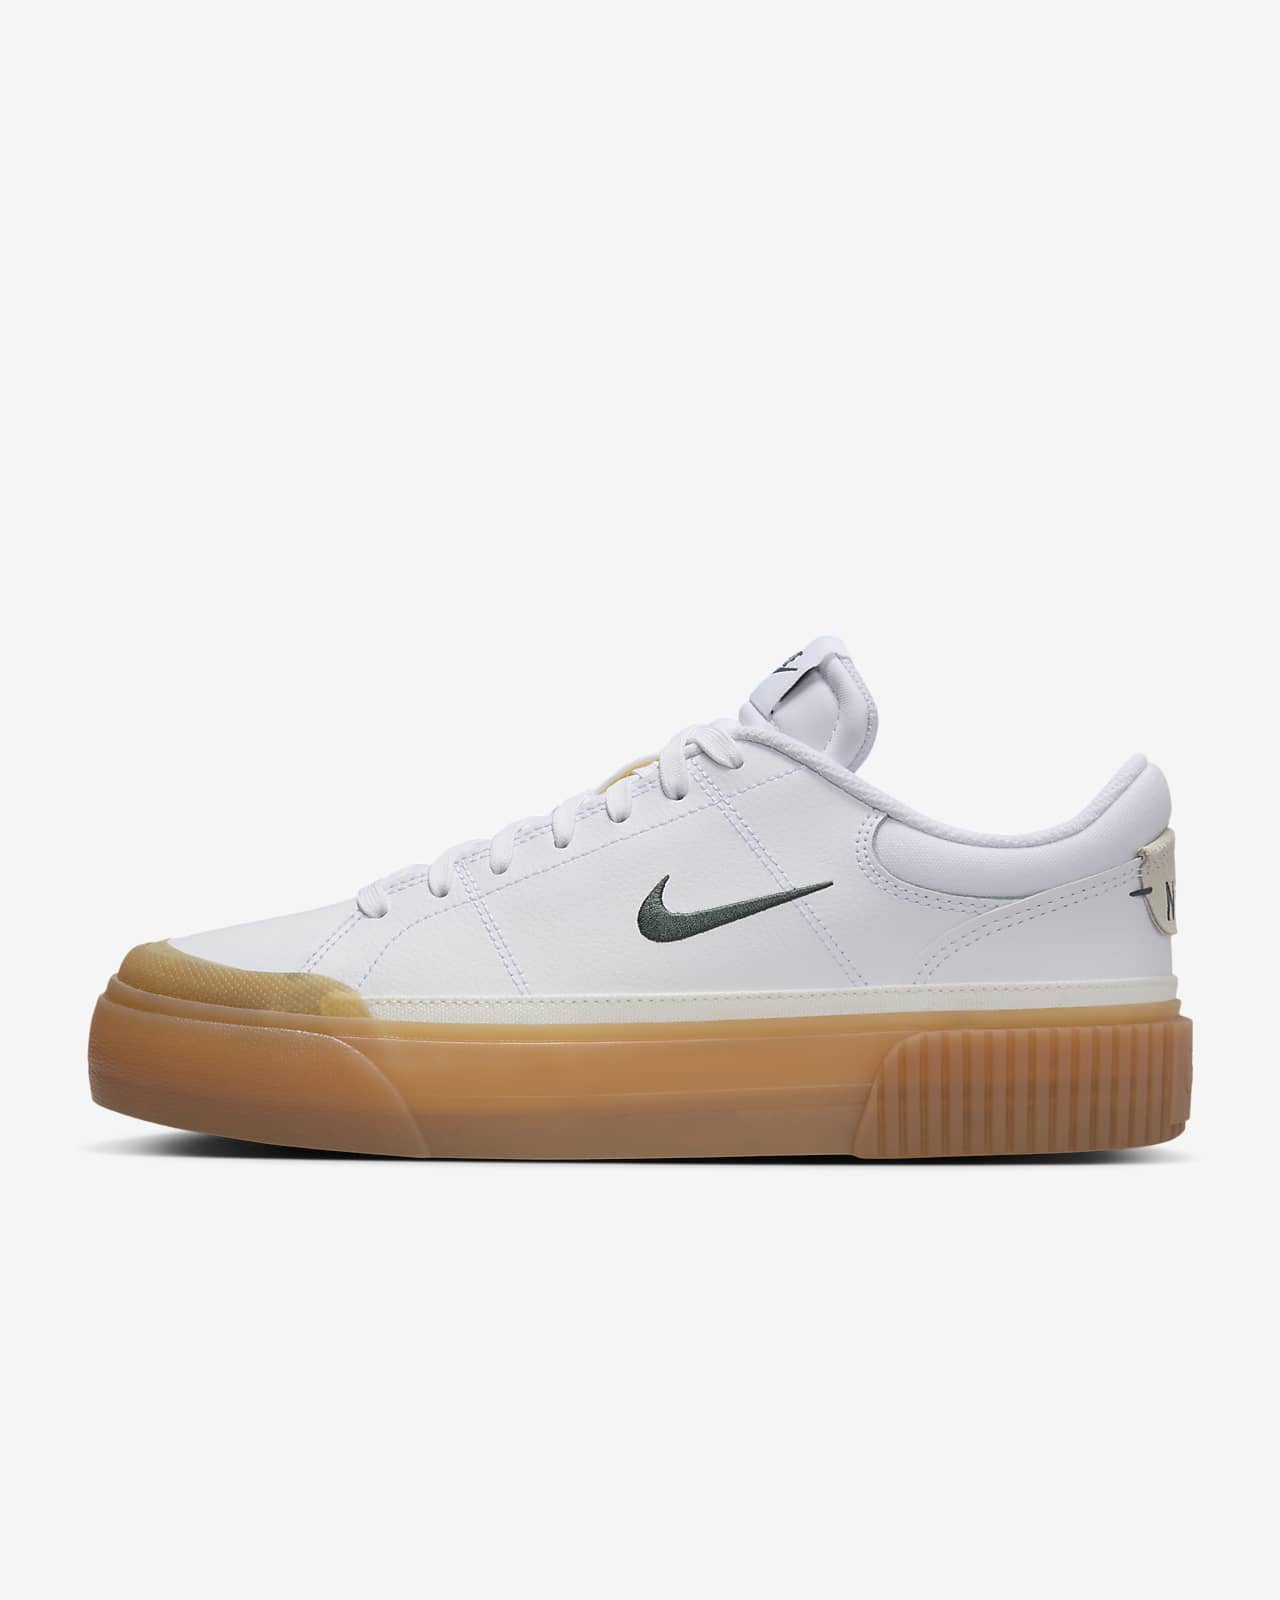 Chaussure Nike Court Legacy Lift pour femme